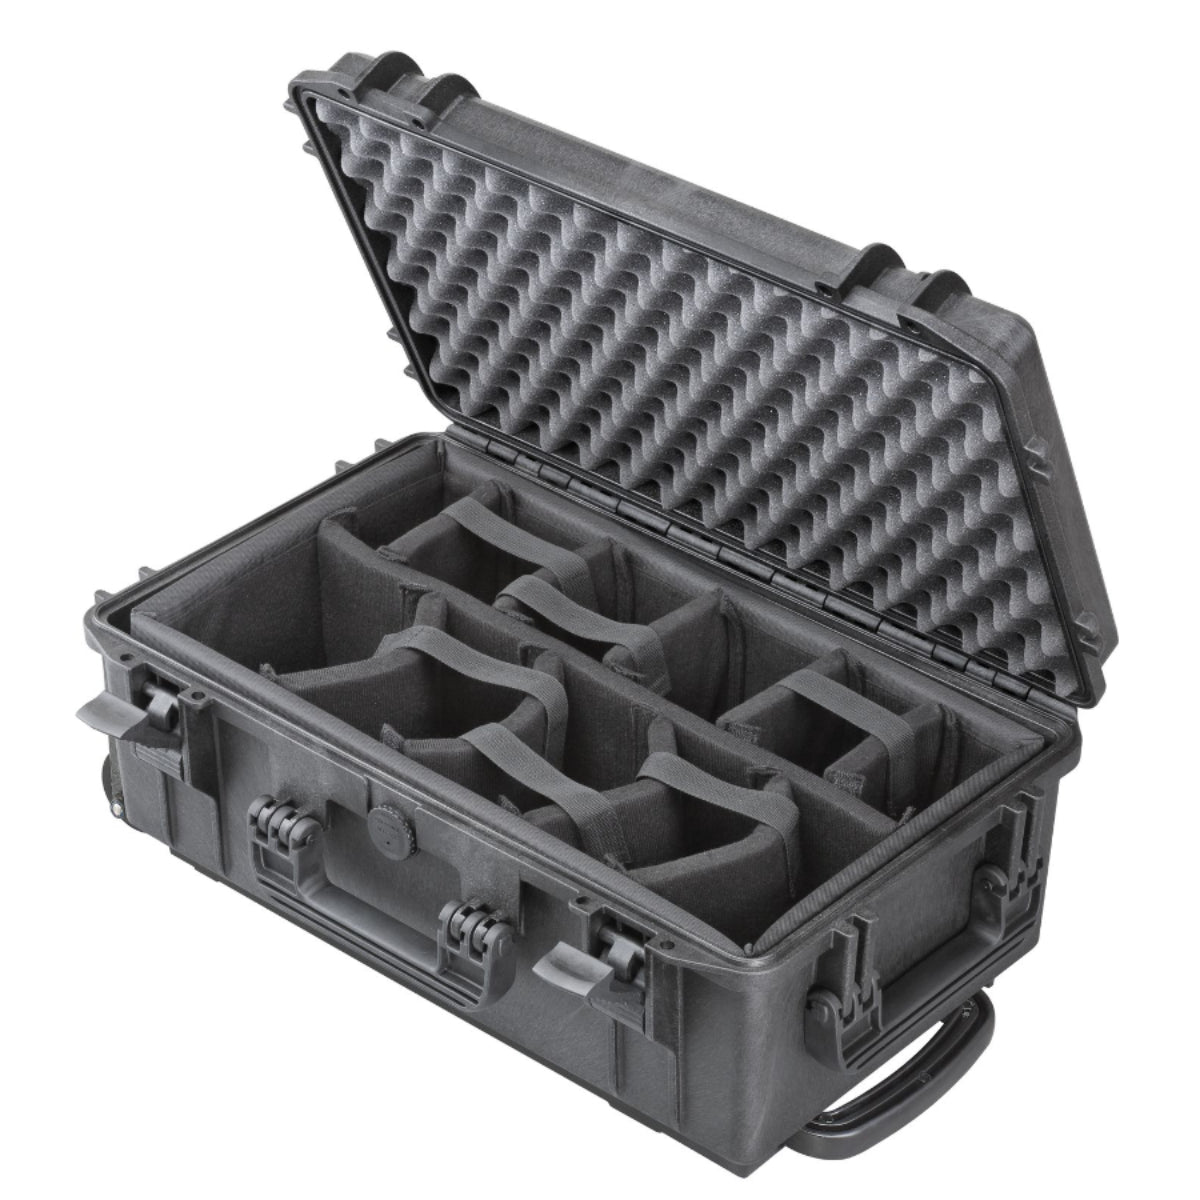 SP PRO 520CAMTR Black Trolley Case, Padded Dividers, ID: L520xW290xH200mm